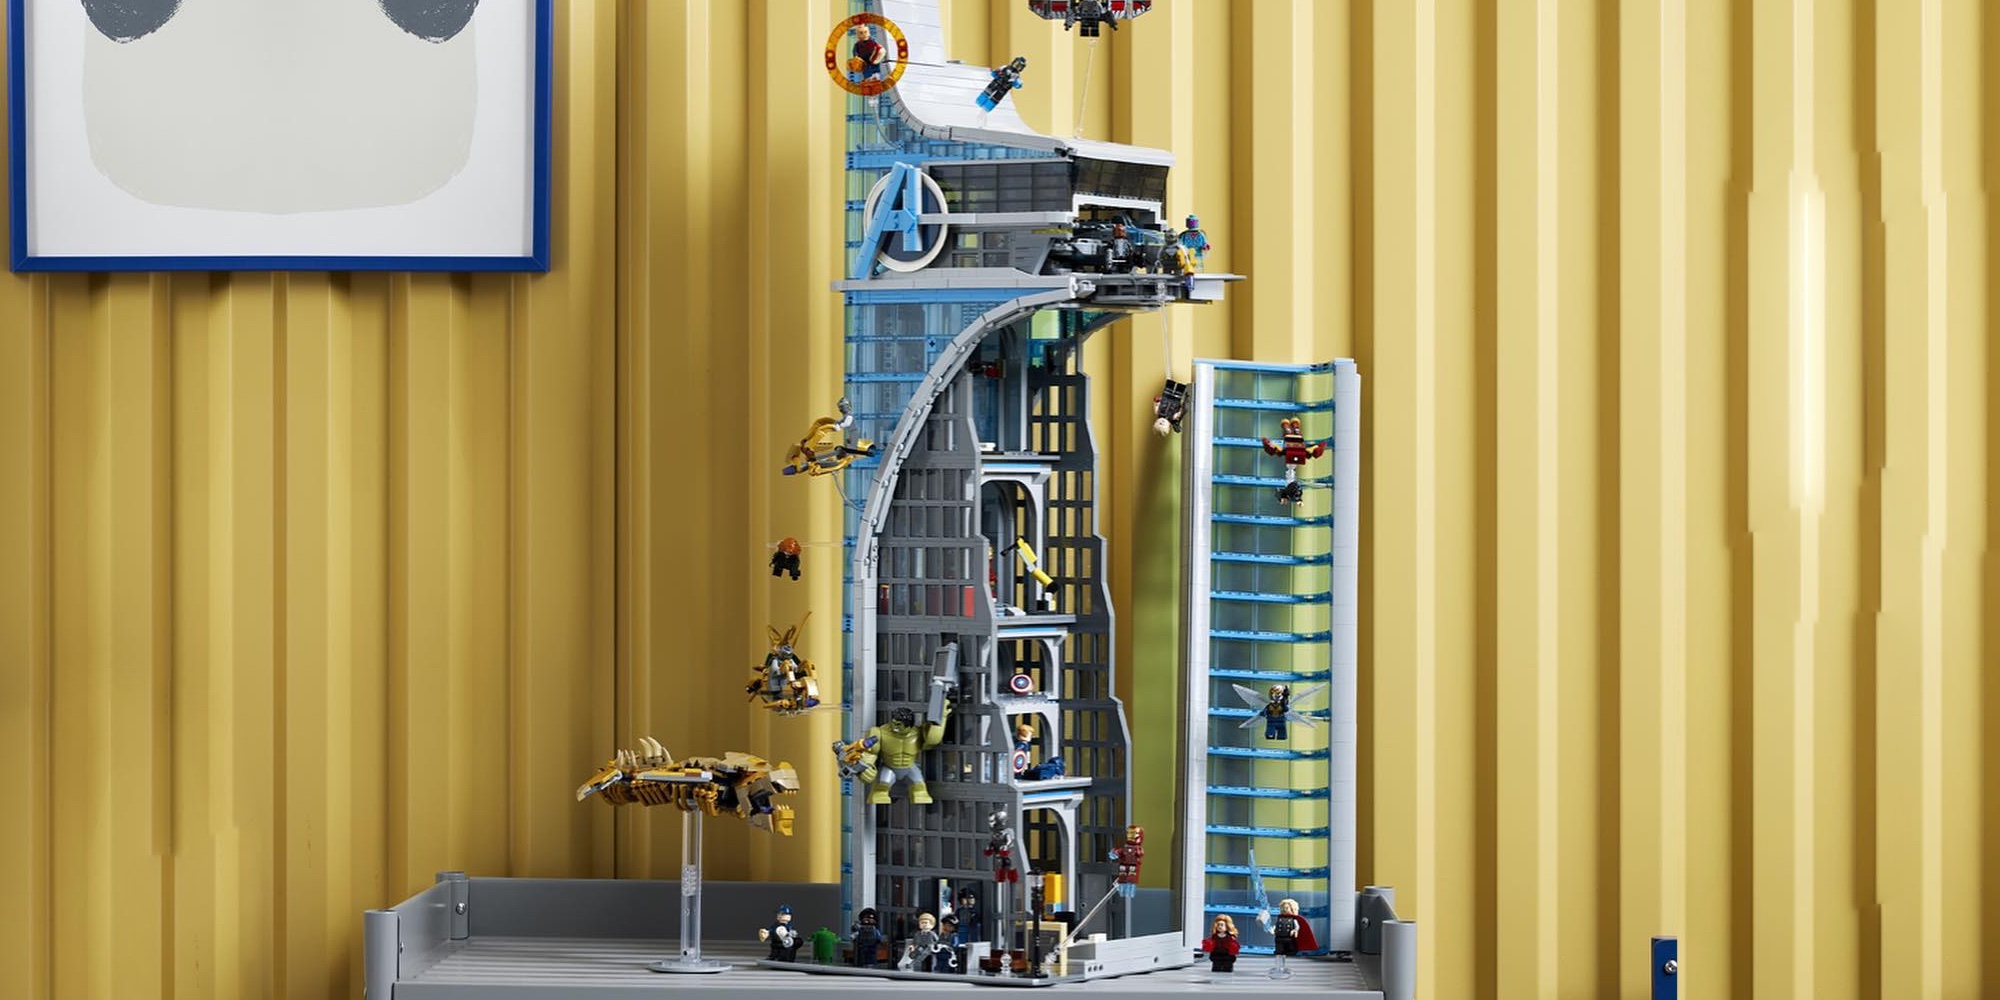 LEGO MOC Huge Avengers Tower by Brick North